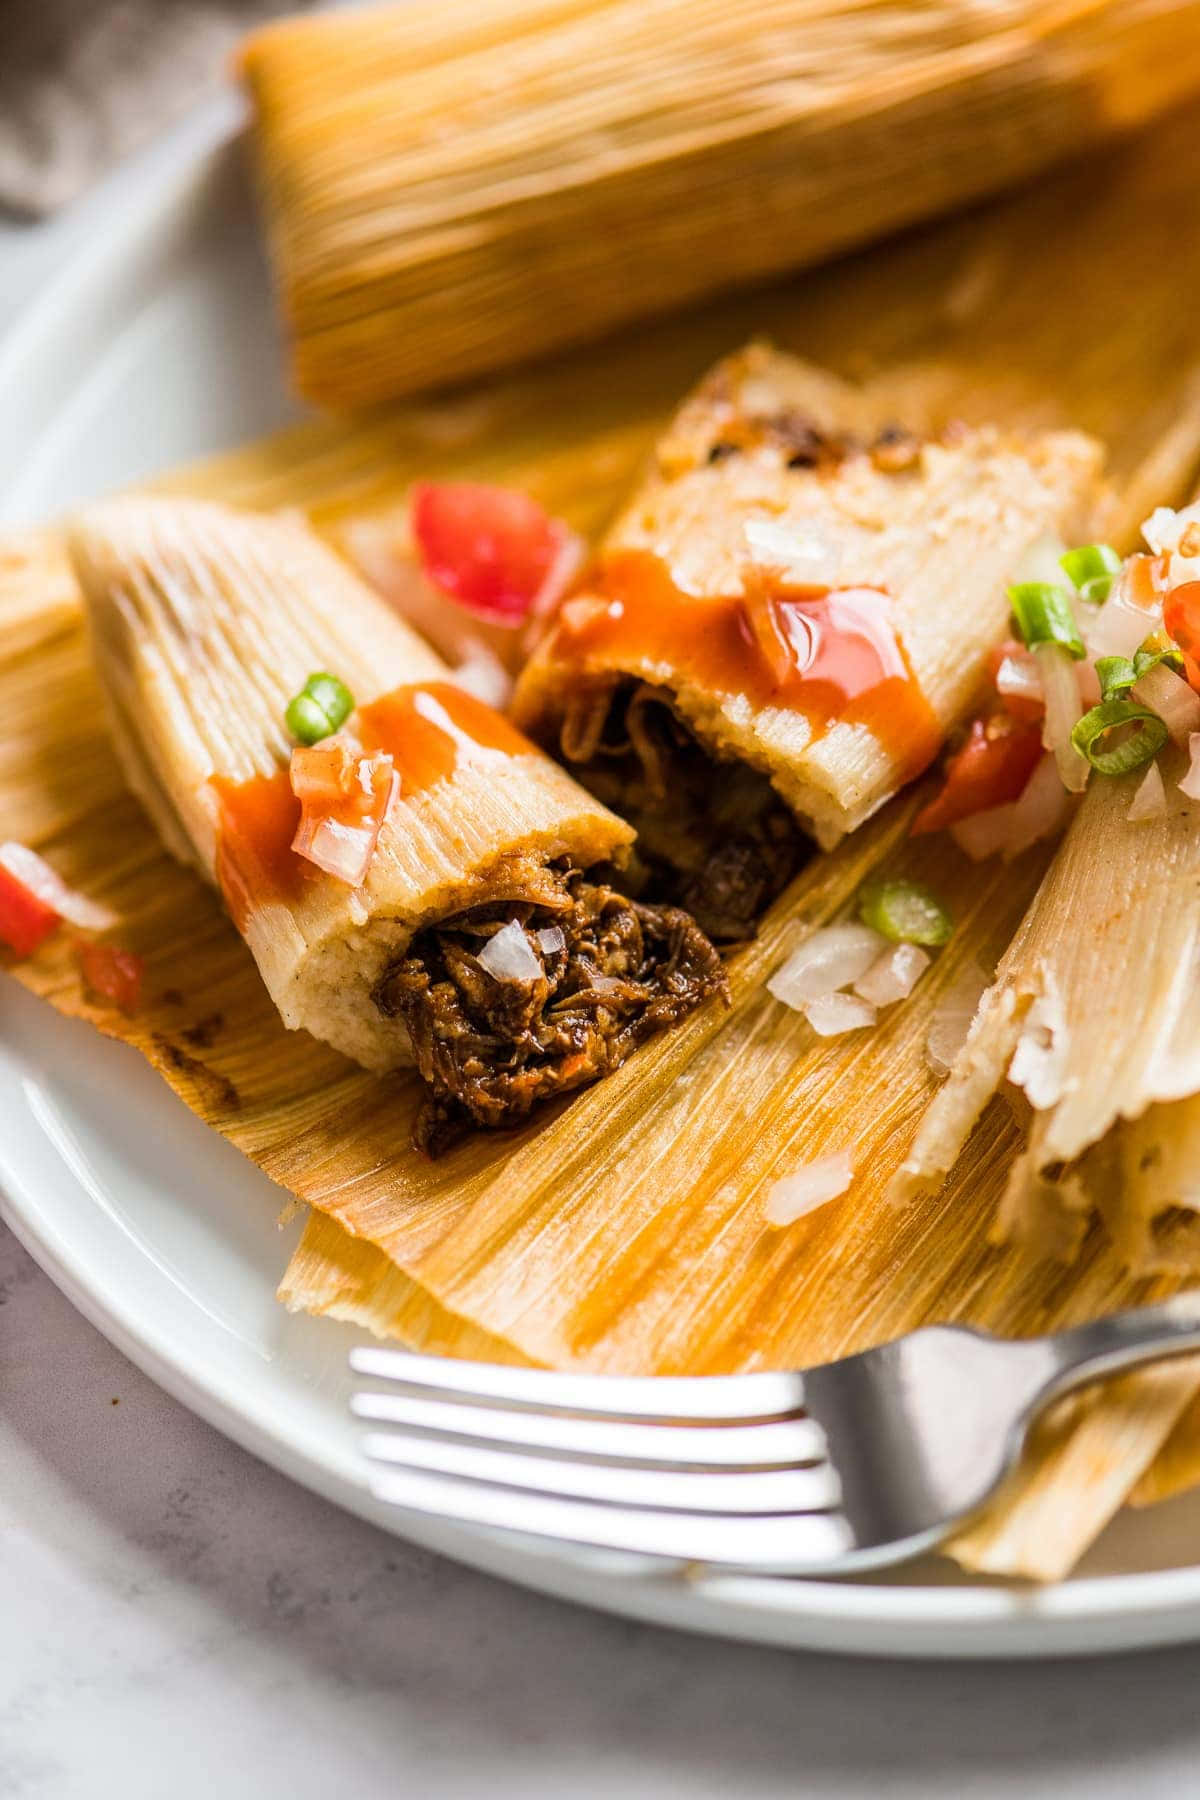 Authentic Tamale - A Taste of Mexican Cuisine Wallpaper